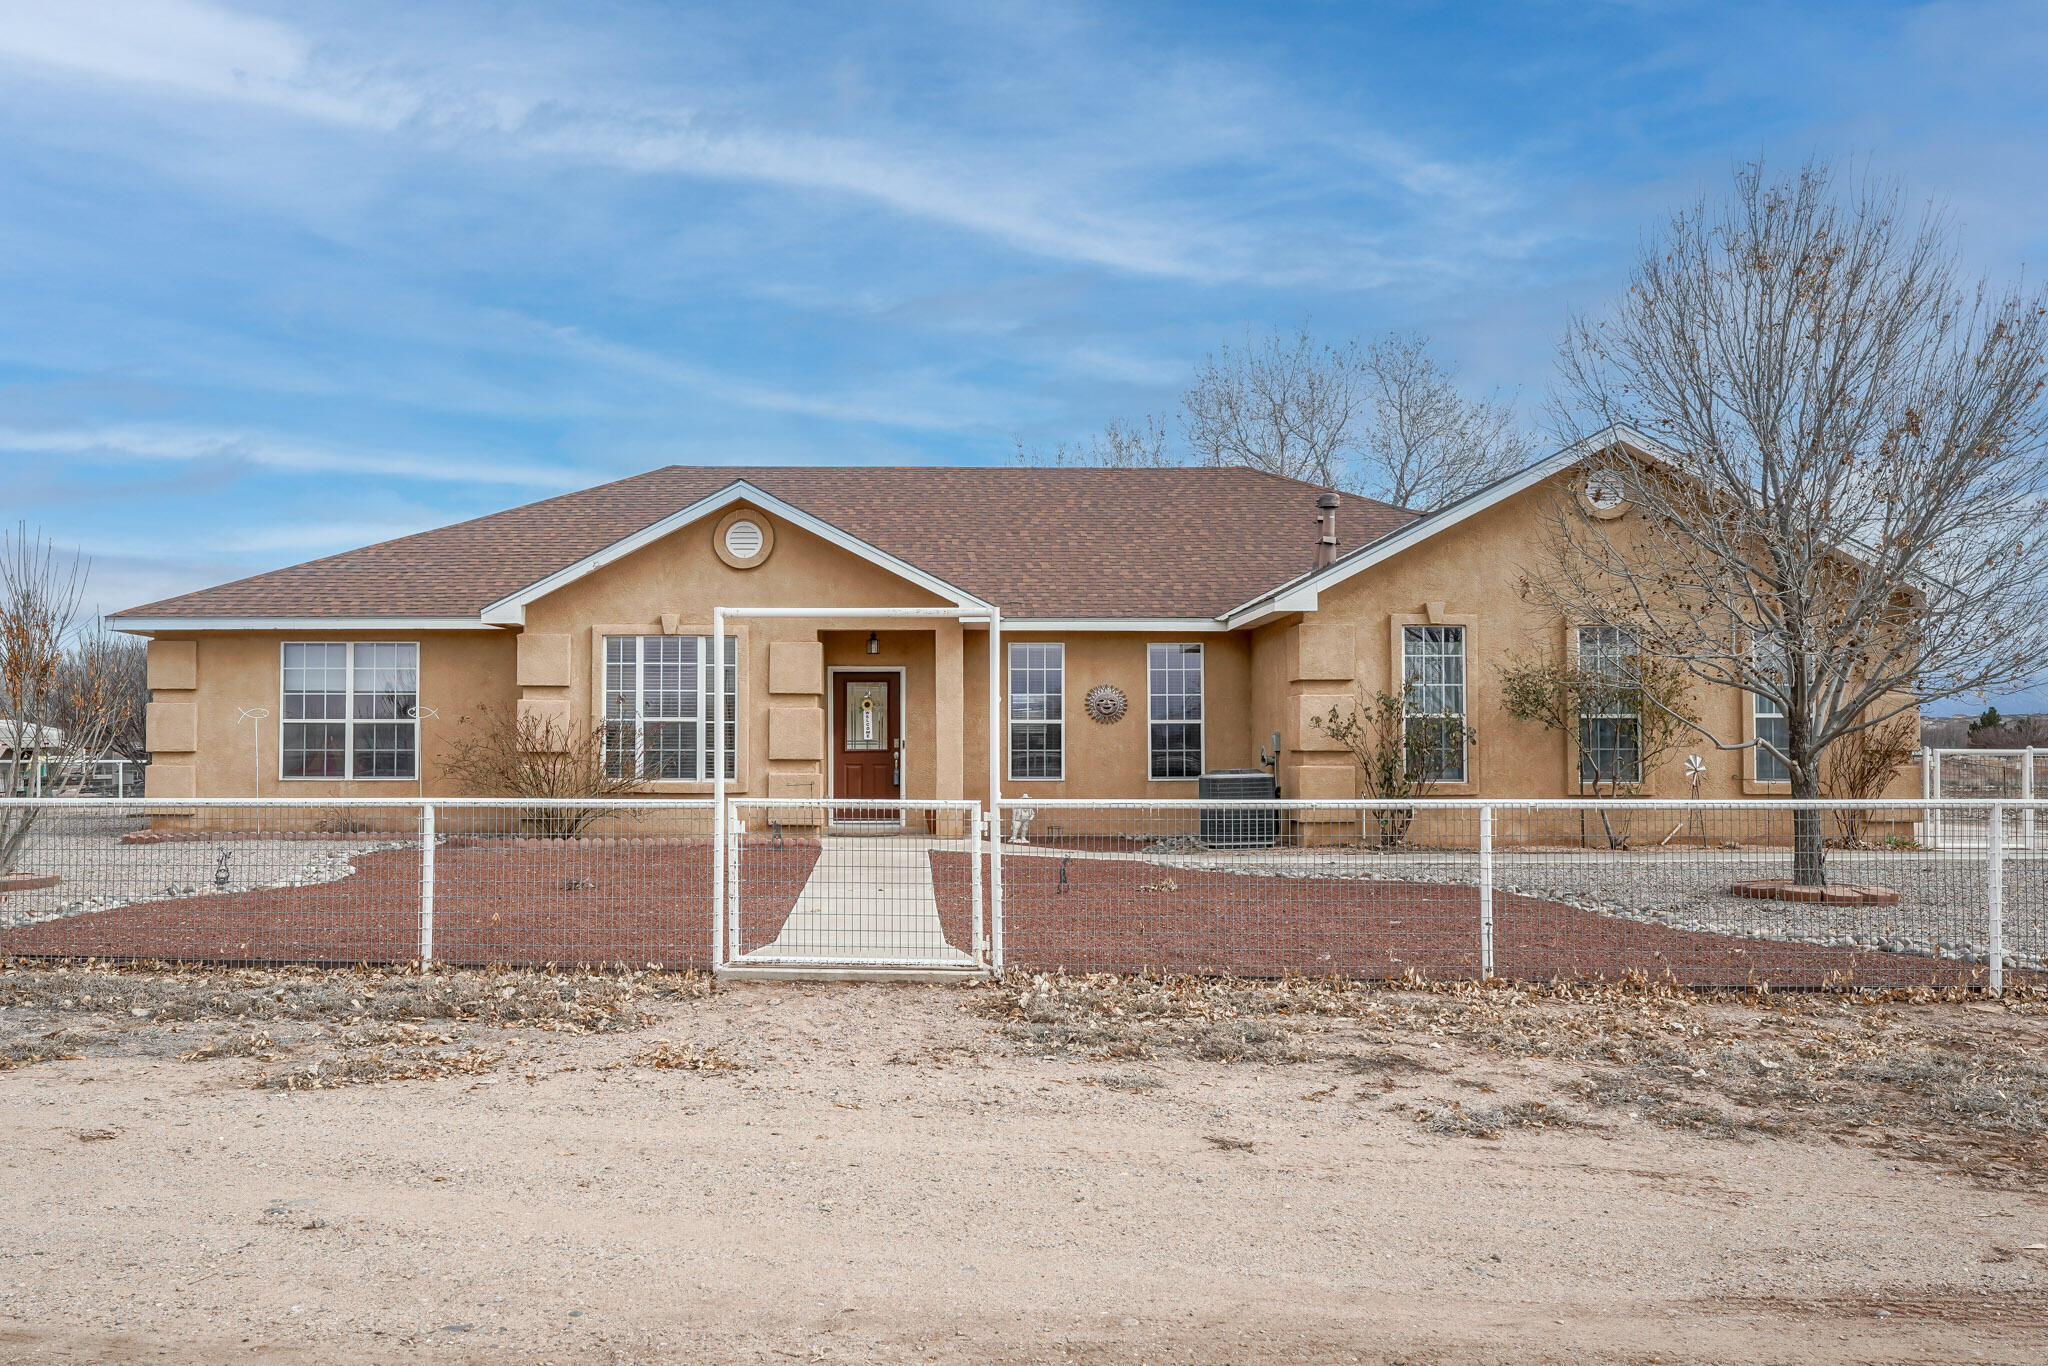 16 Jerome Road, Los Lunas, New Mexico 87031, 4 Bedrooms Bedrooms, ,3 BathroomsBathrooms,Residential,For Sale,16 Jerome Road,1056101